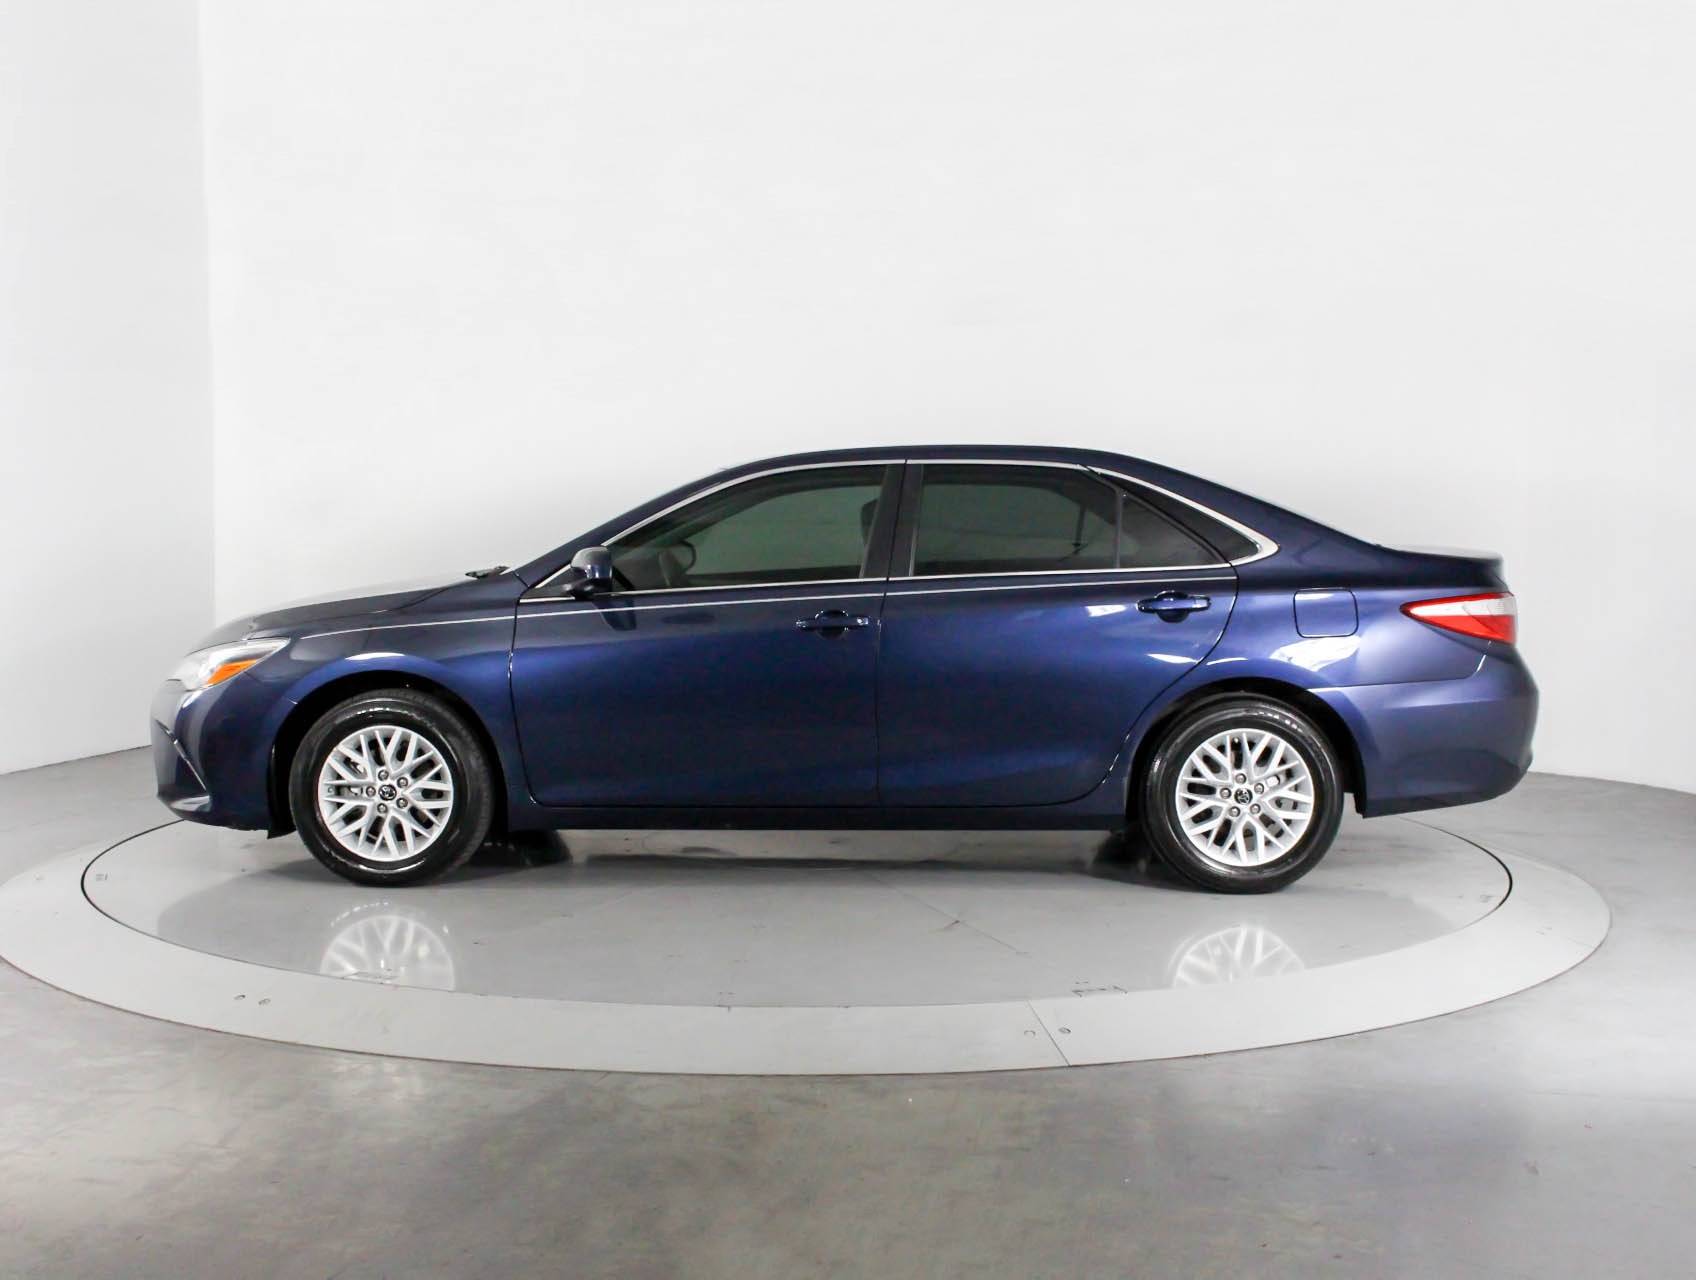 Florida Fine Cars - Used TOYOTA CAMRY 2016 WEST PALM Le